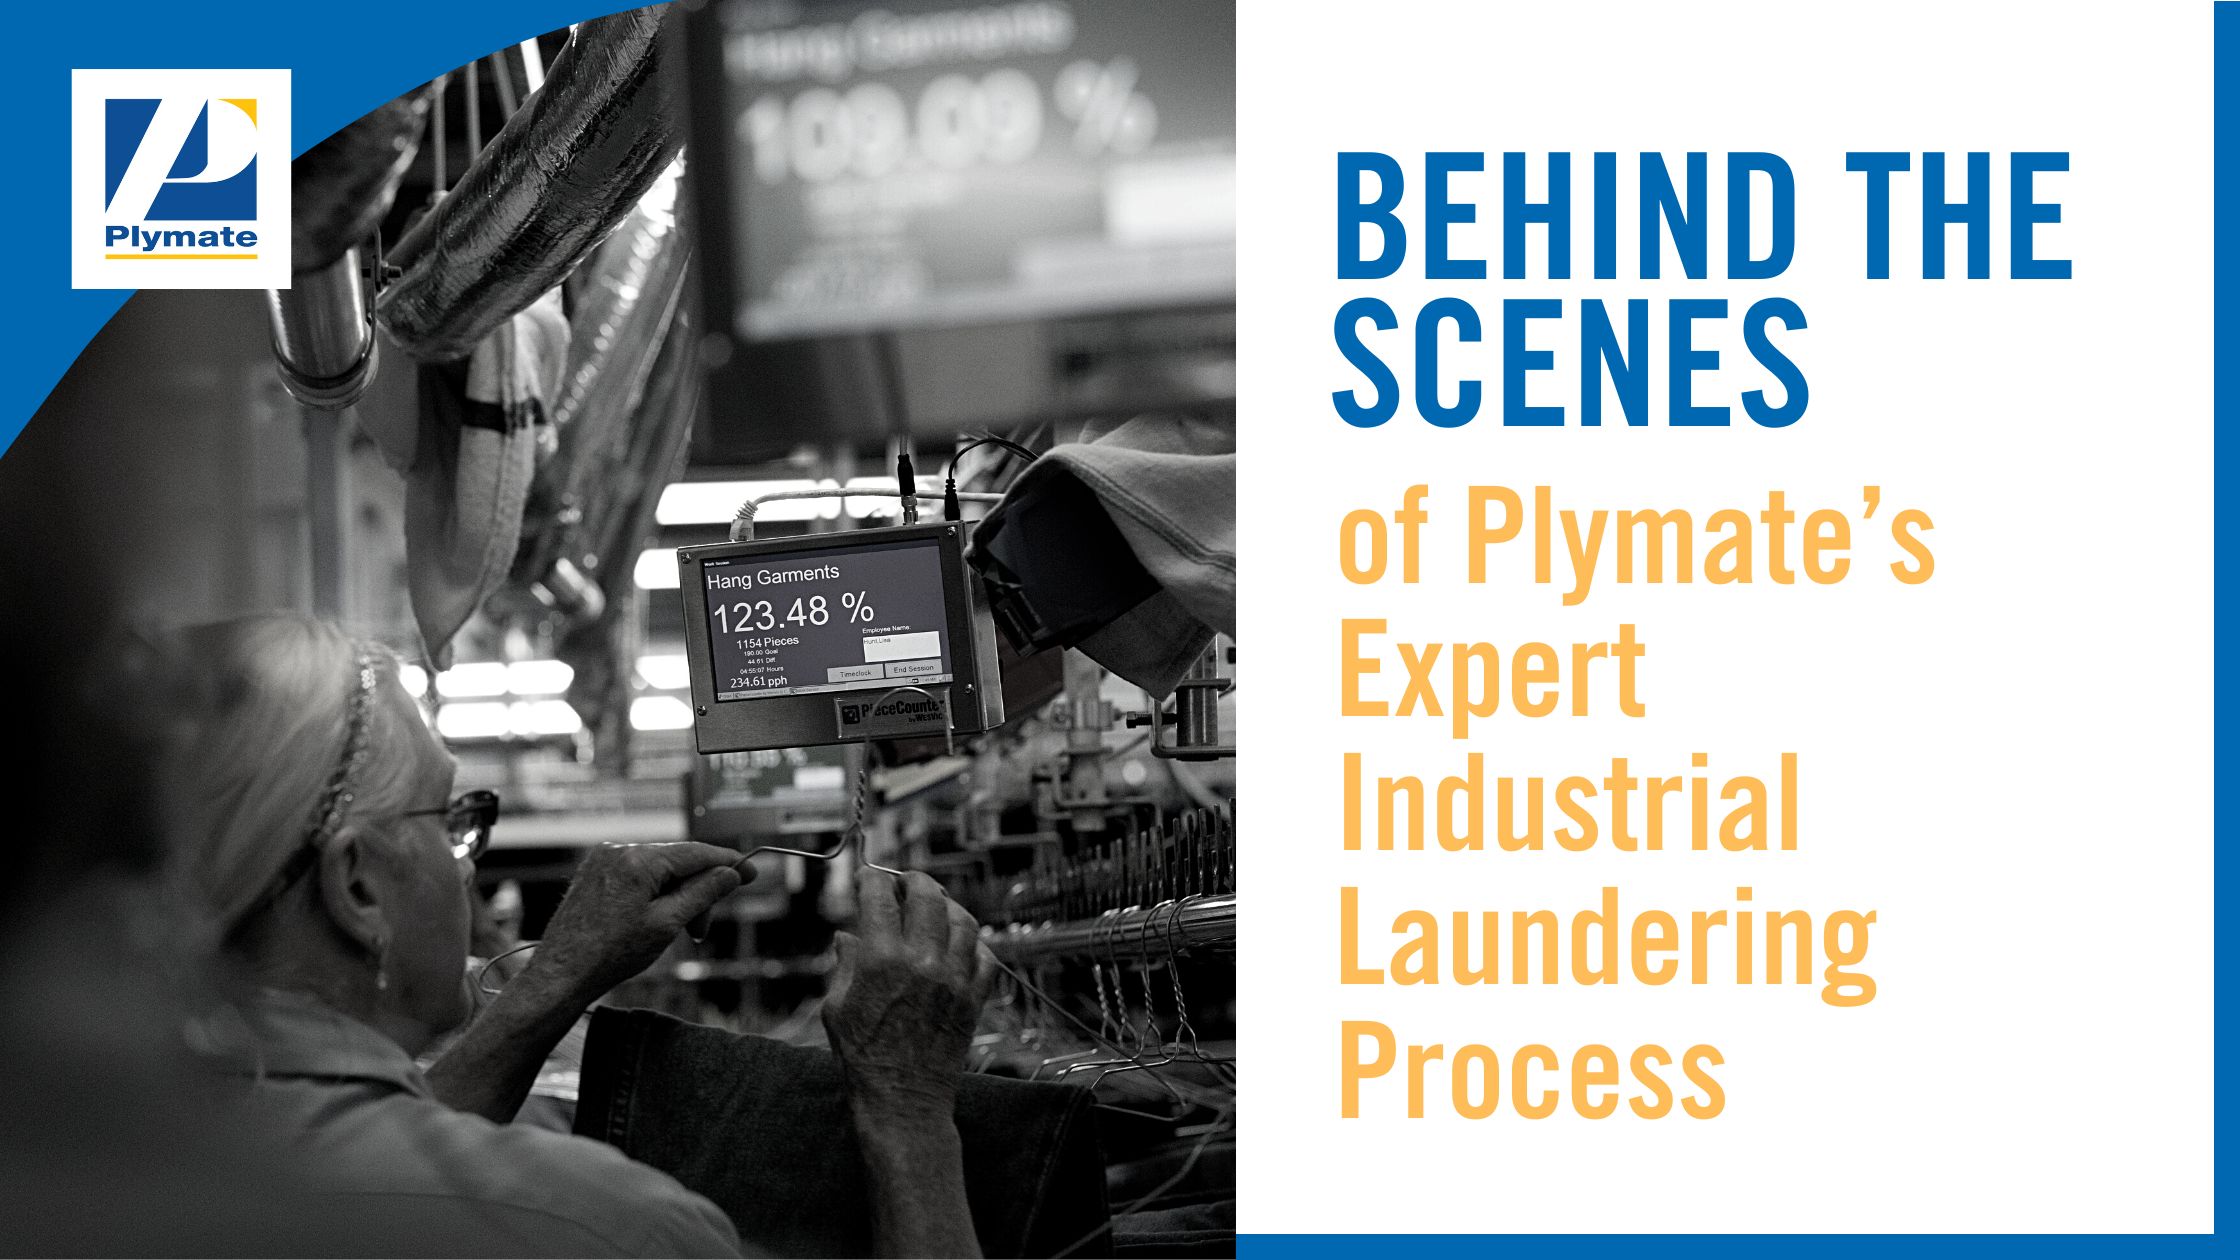 Take a Behind The Scenes Tour of Plymate’s Expert Industrial Laundering Process